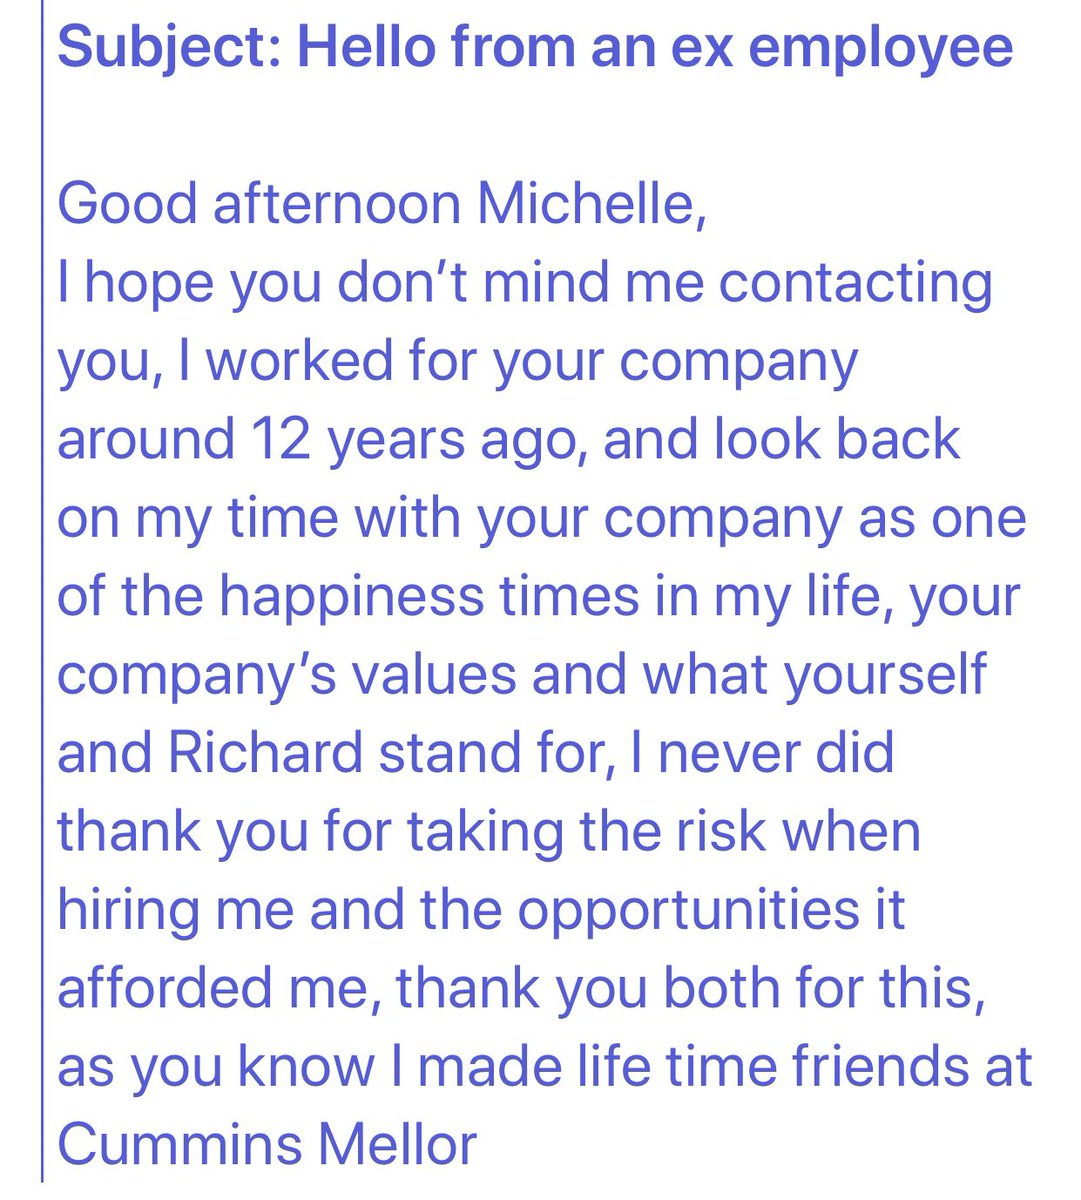 So humbled to receive an email out of the blue from an ex colleague...it truly has made my day 😀 #sayingthankyou #beingkind #appreciation #whocareswins